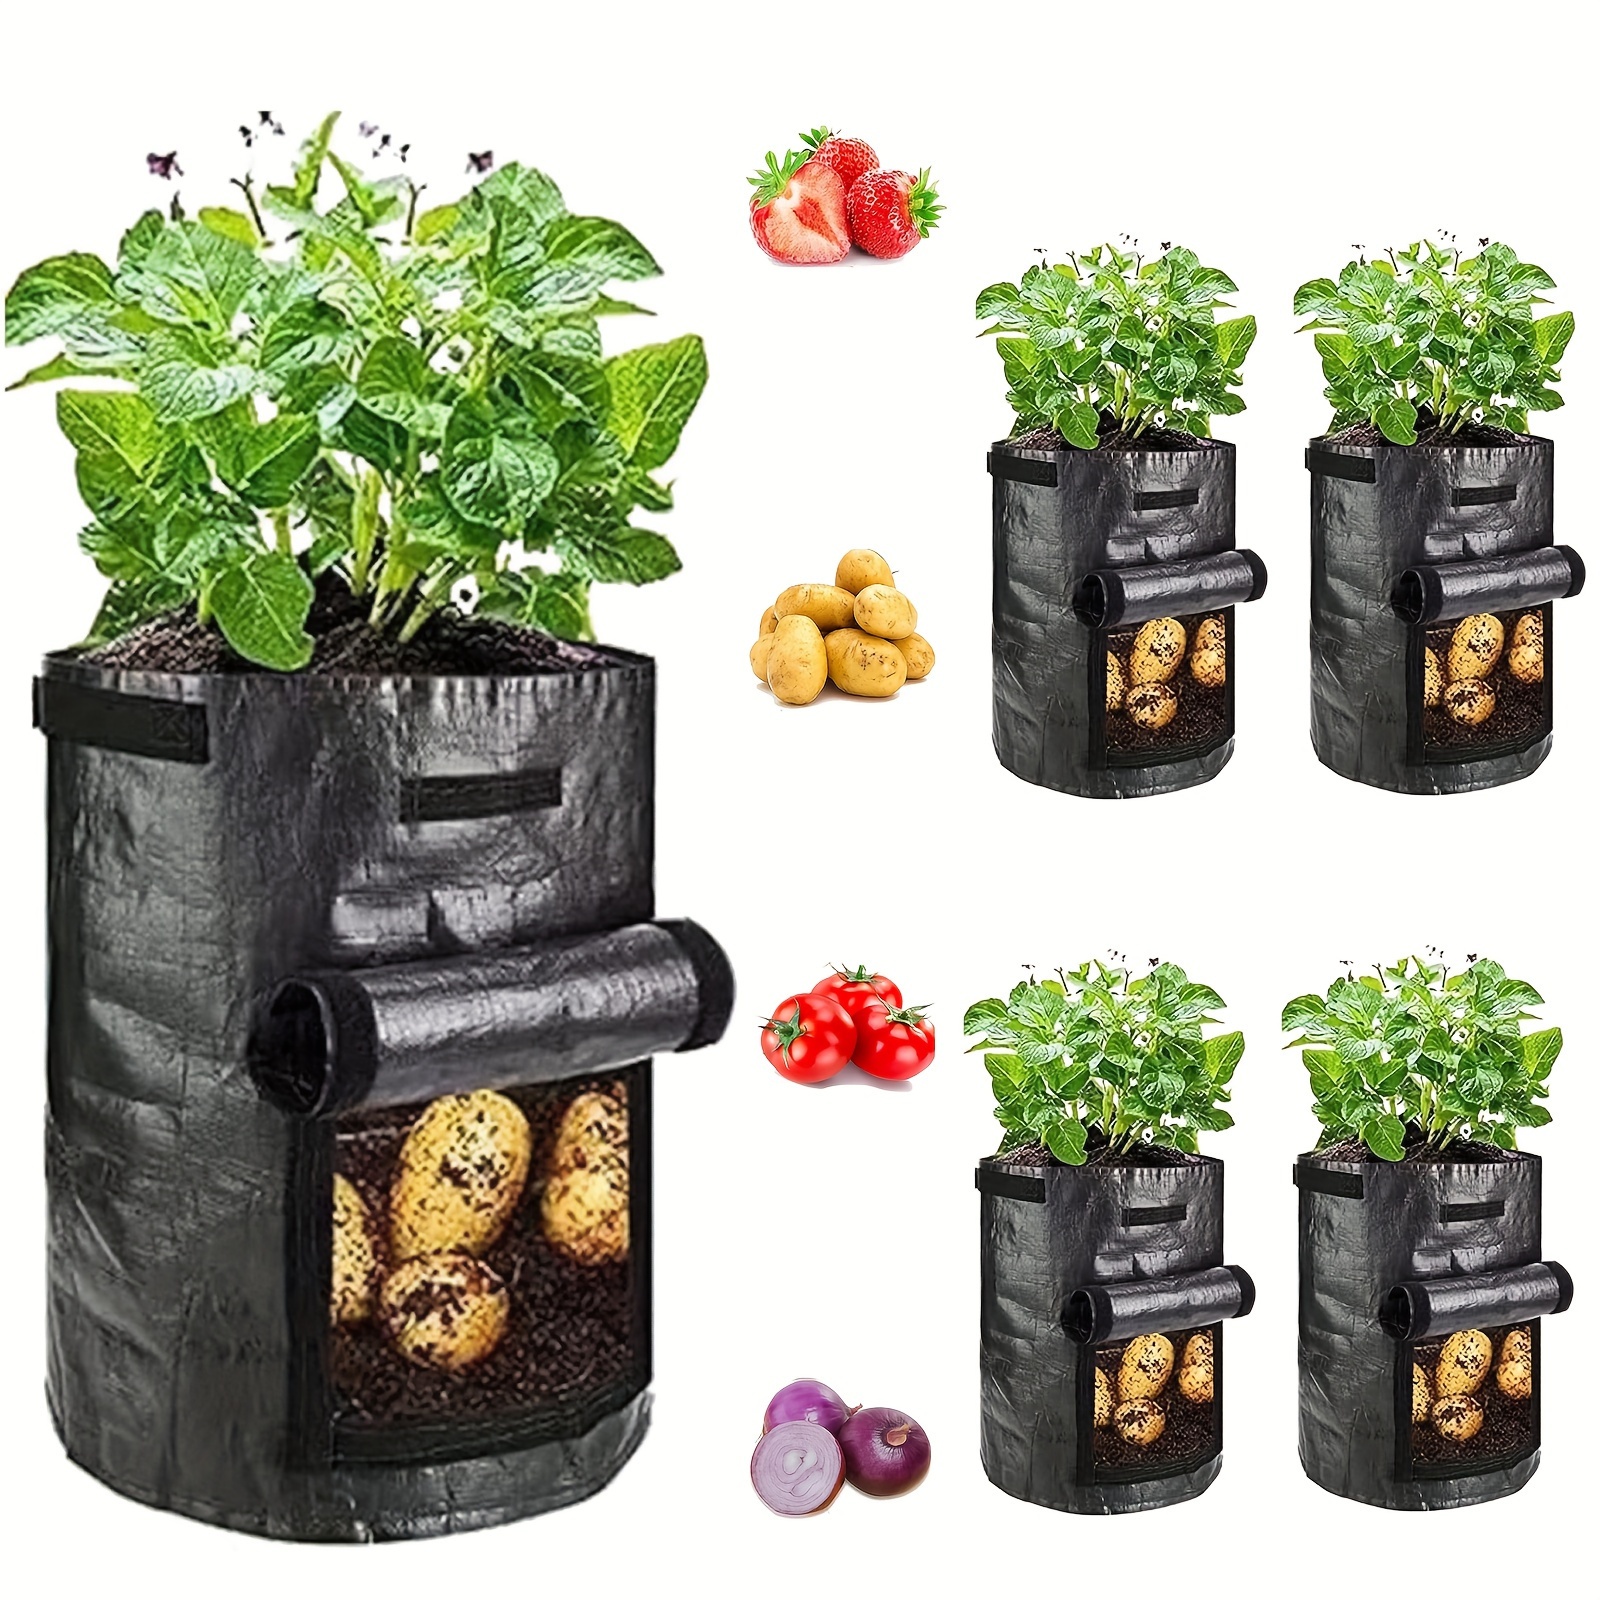 4-Gallon Black Grow Bags (4-Pack), Fabric Planter Bags for